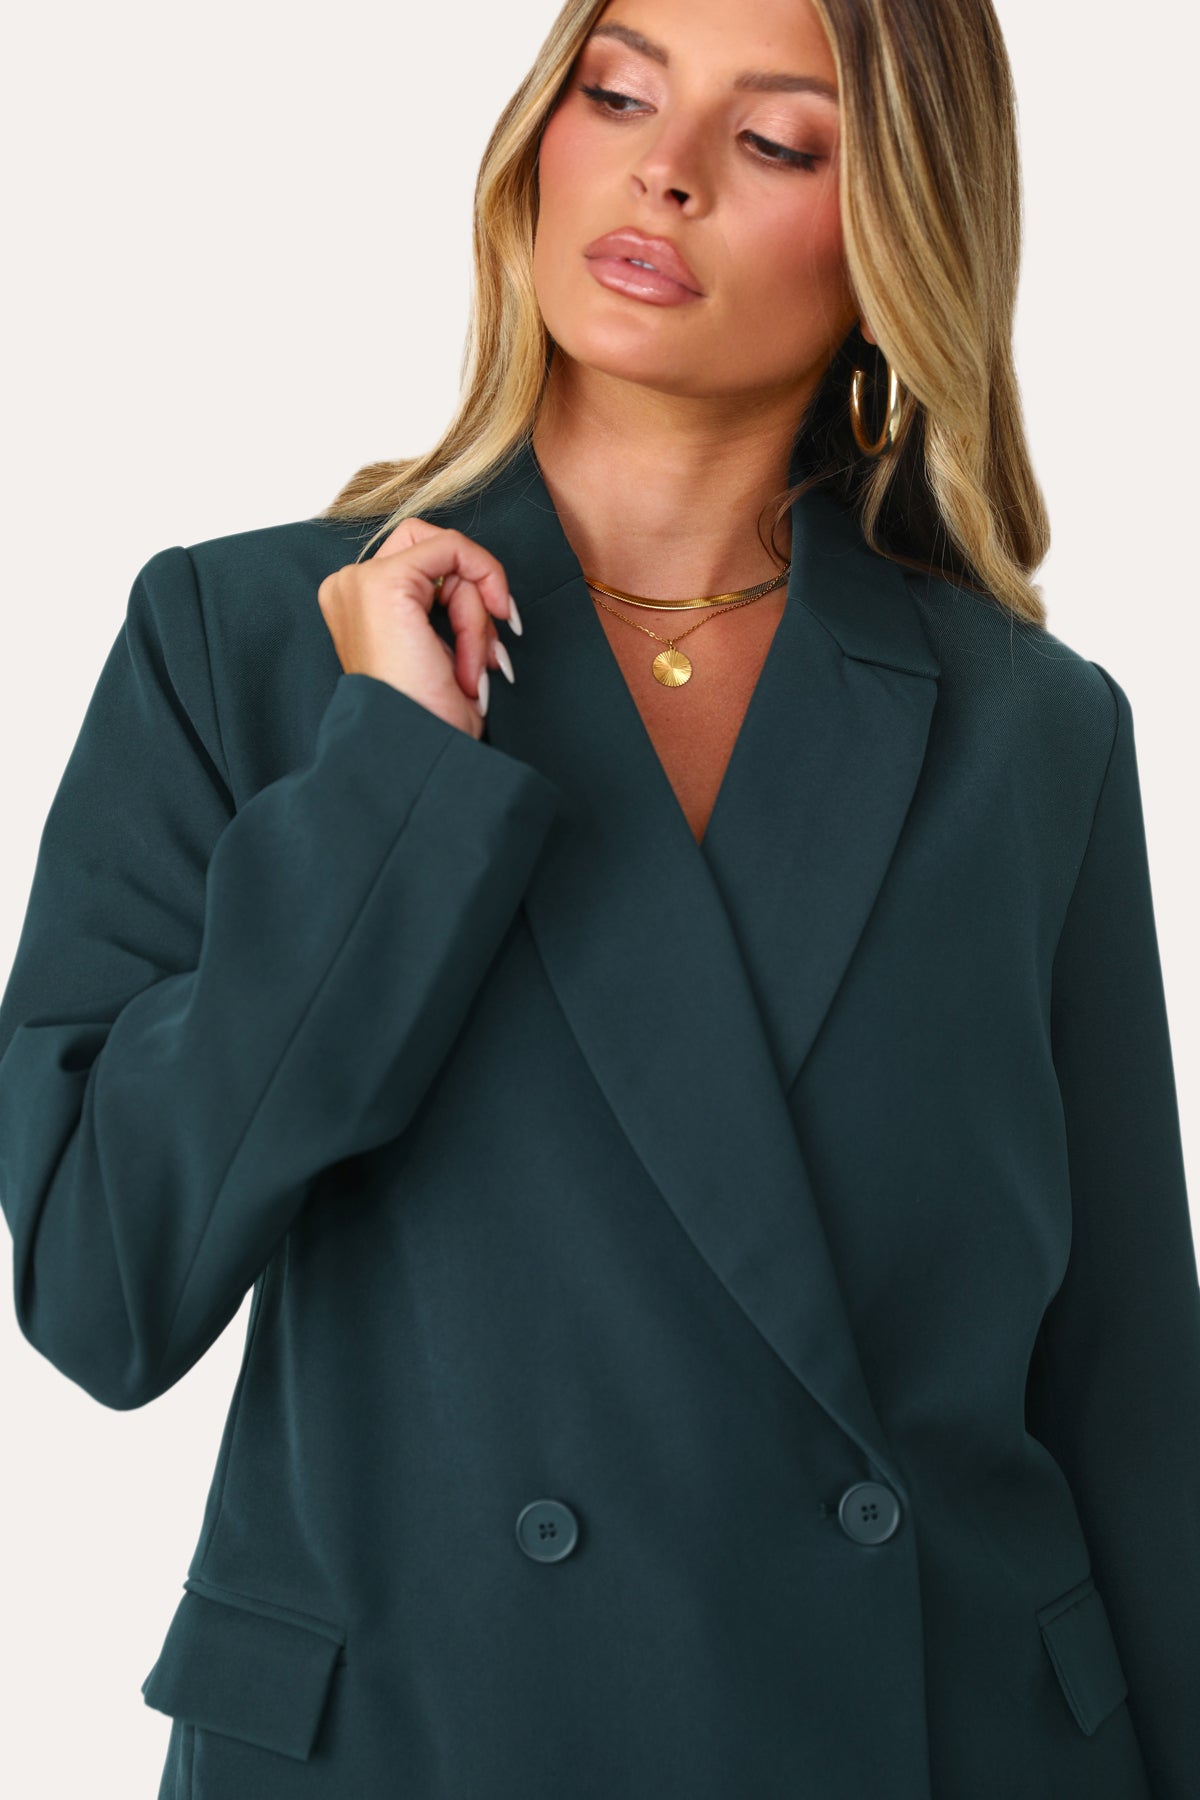 Model wearing the Go To Teal Blazer. 